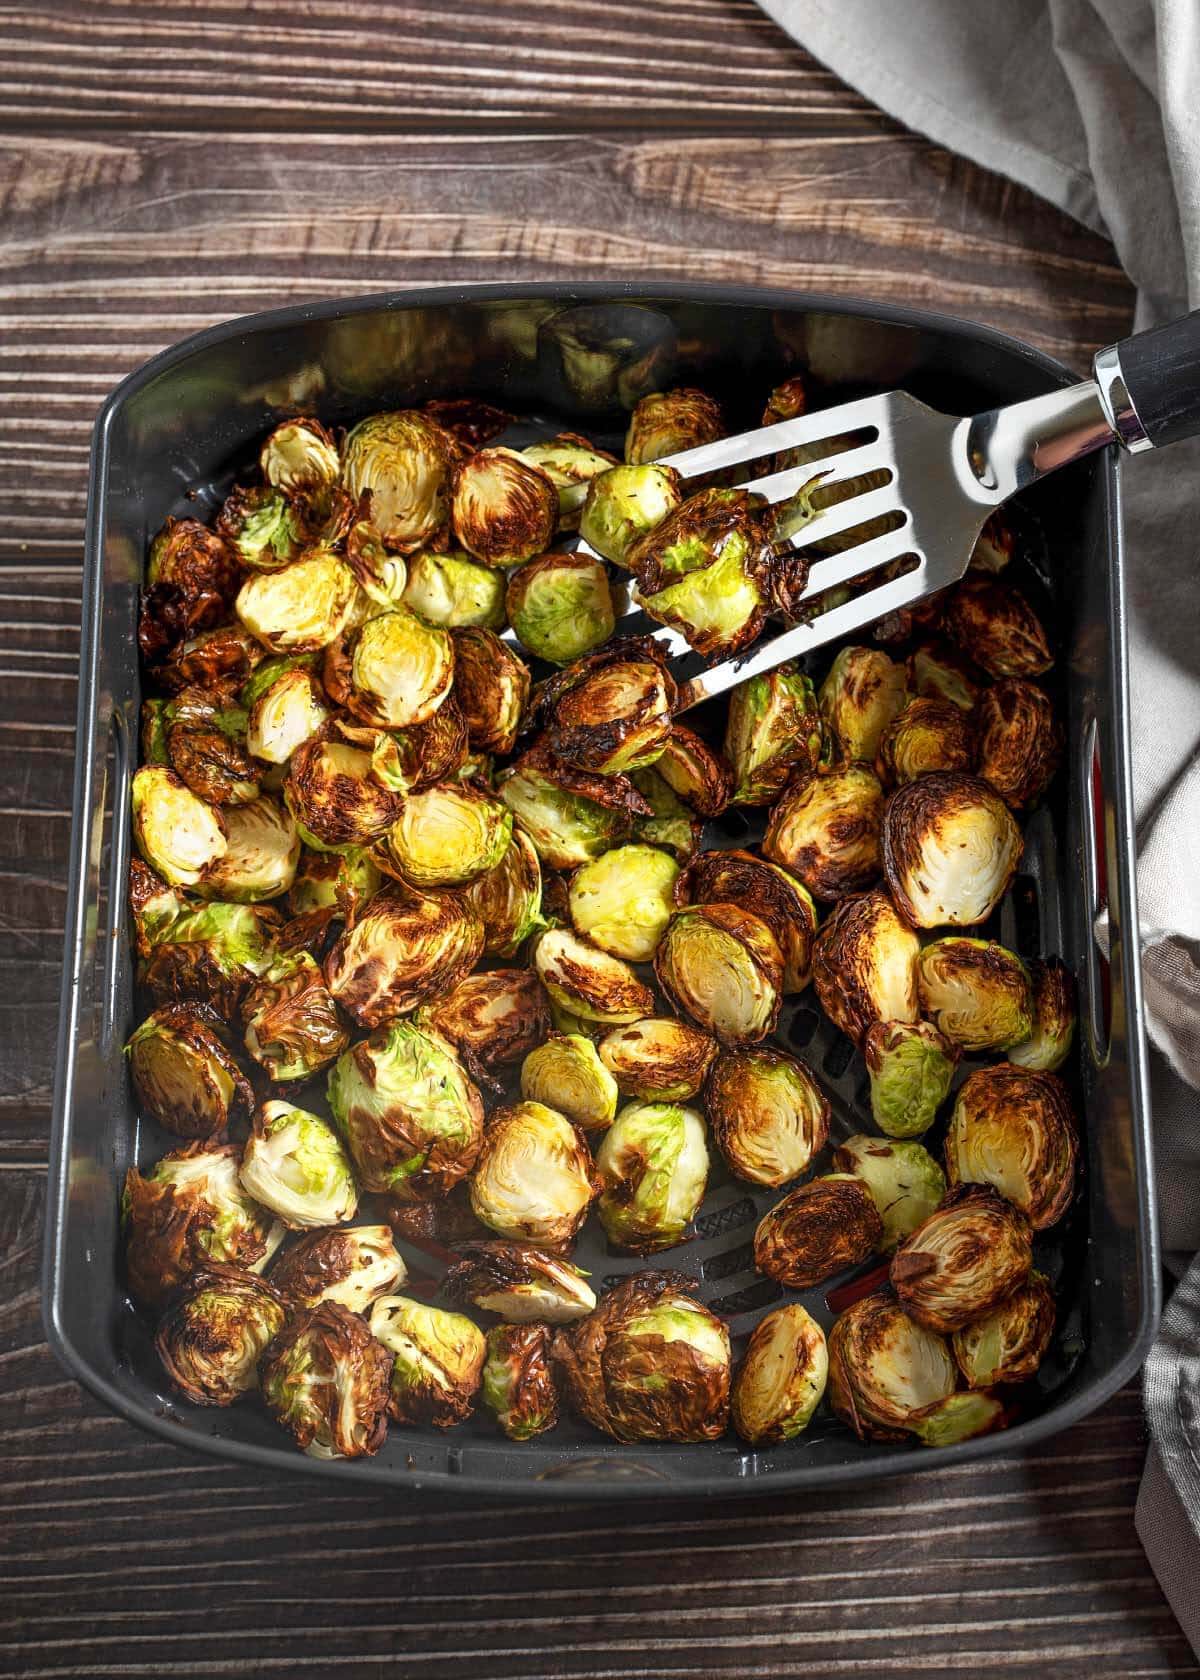 Air Fryer Brussels Sprouts in the air fryer basket